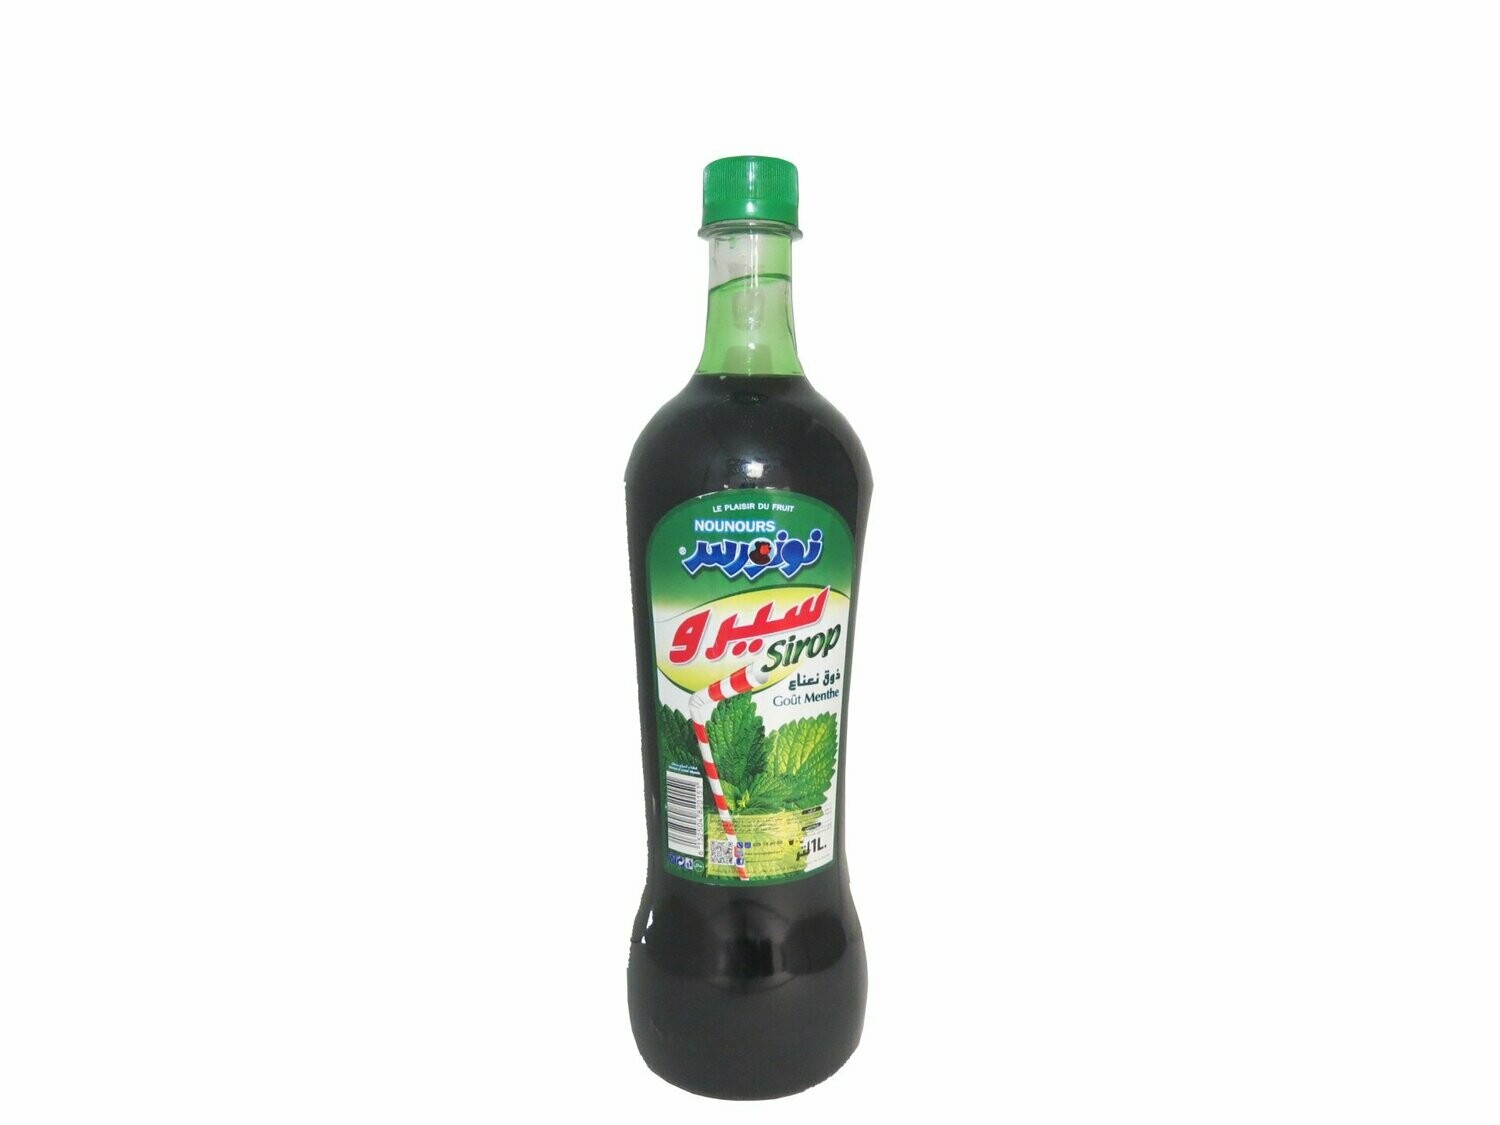 Sirop arome Menth 1L